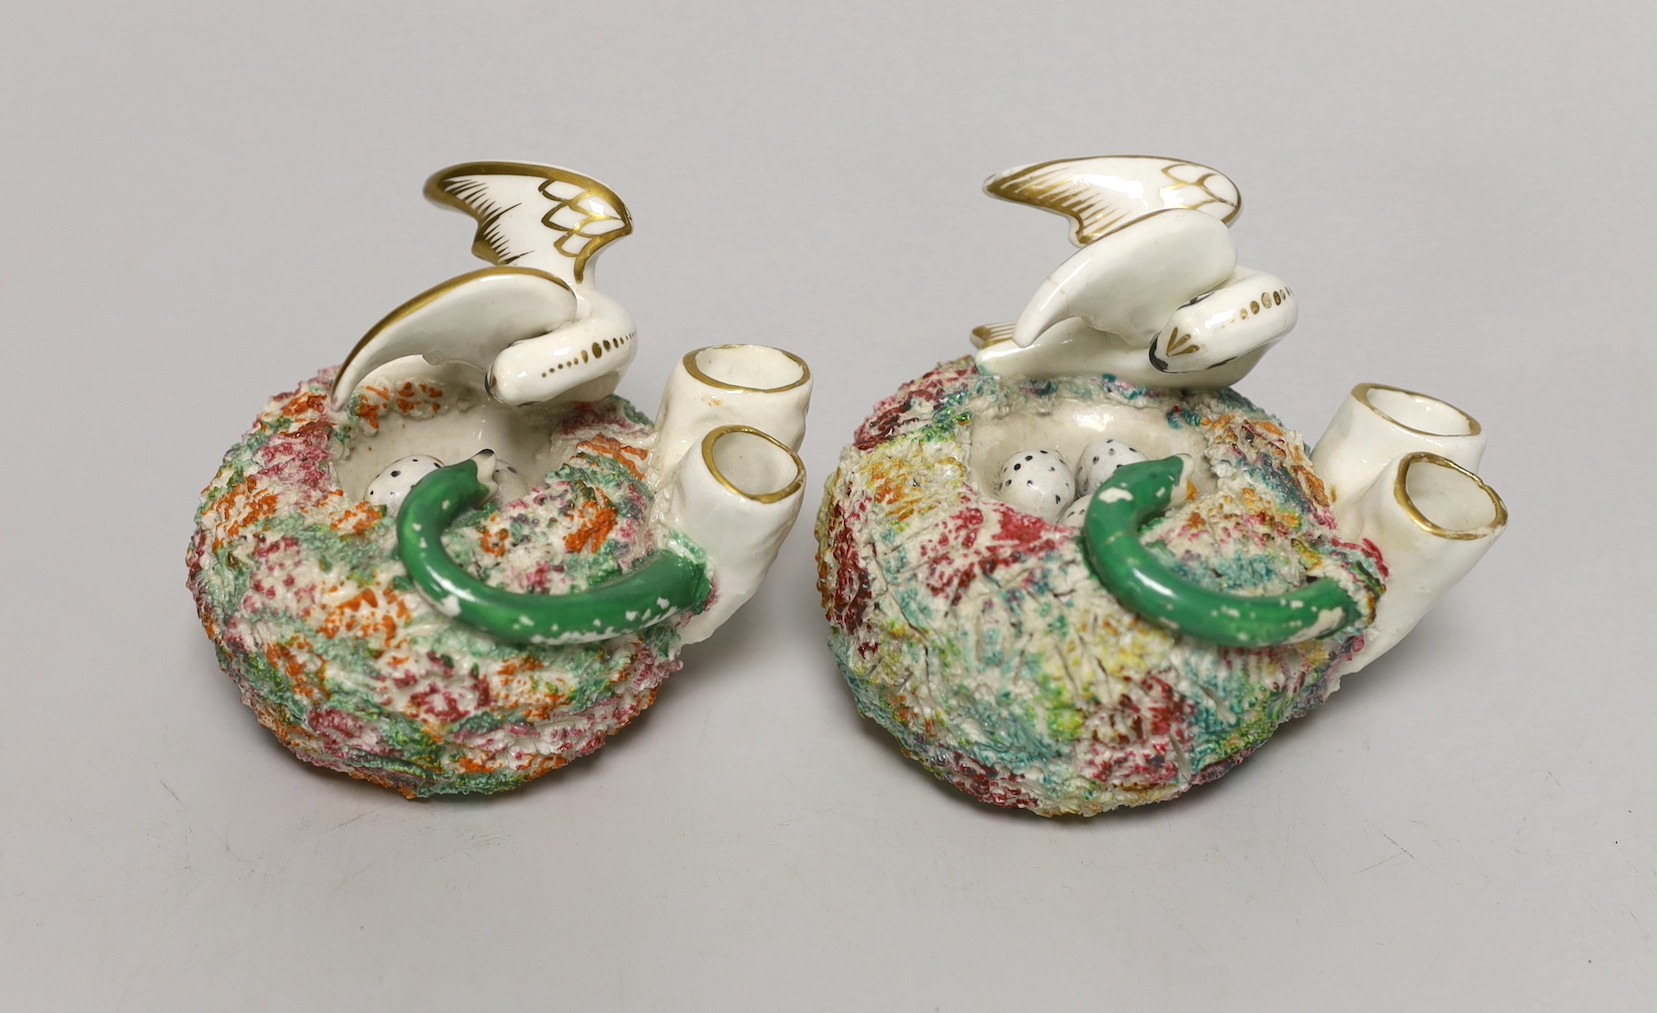 Two similar Staffordshire porcelain 'bird's nest' quill holders, c.1830-50